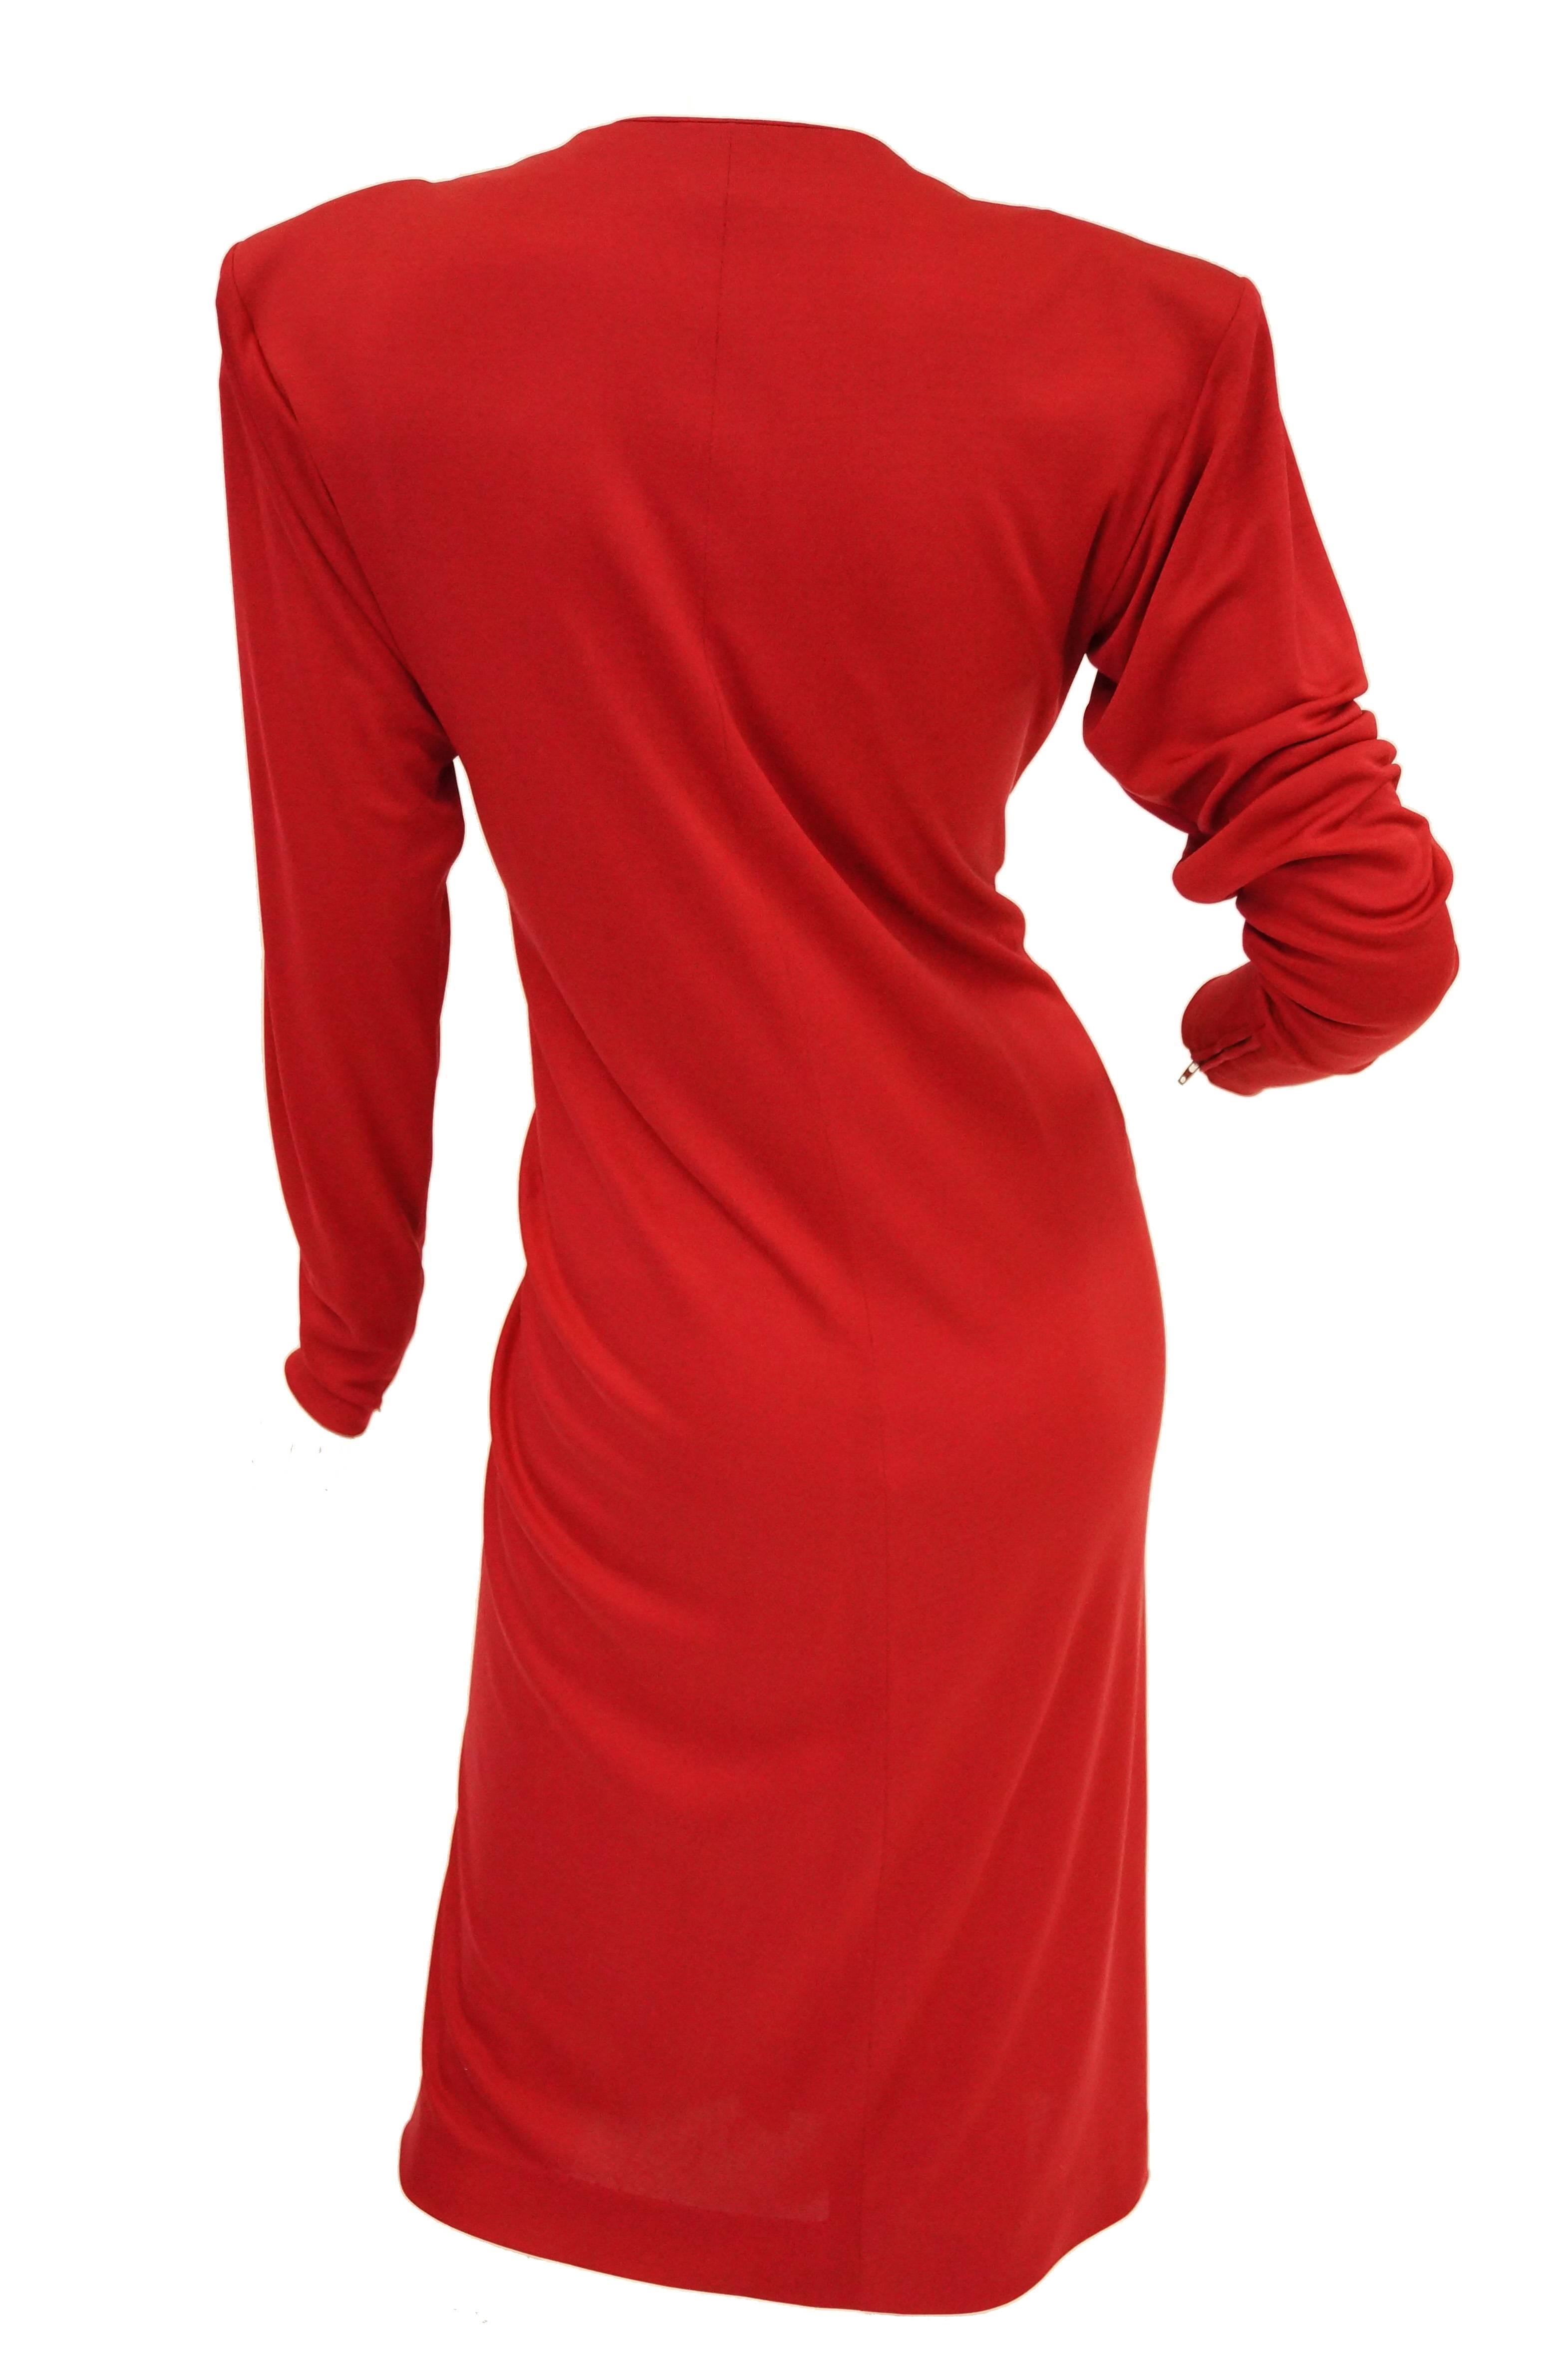 Yves Saint Laurent Silk Jersey Red Plunge Front Dress, 1980s 3